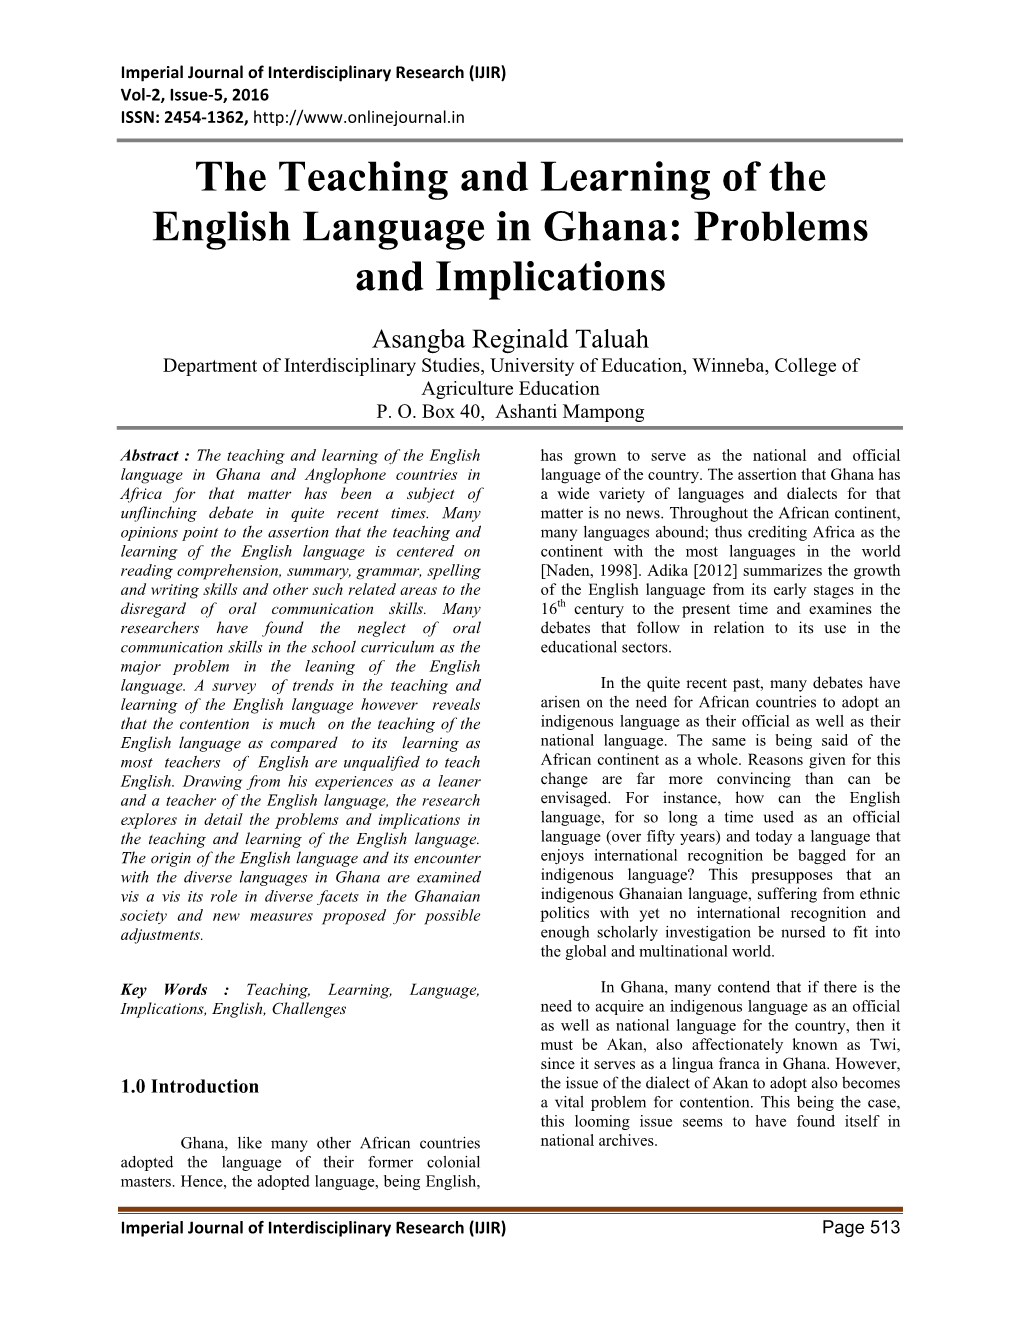 The Teaching and Learning of the English Language in Ghana: Problems and Implications